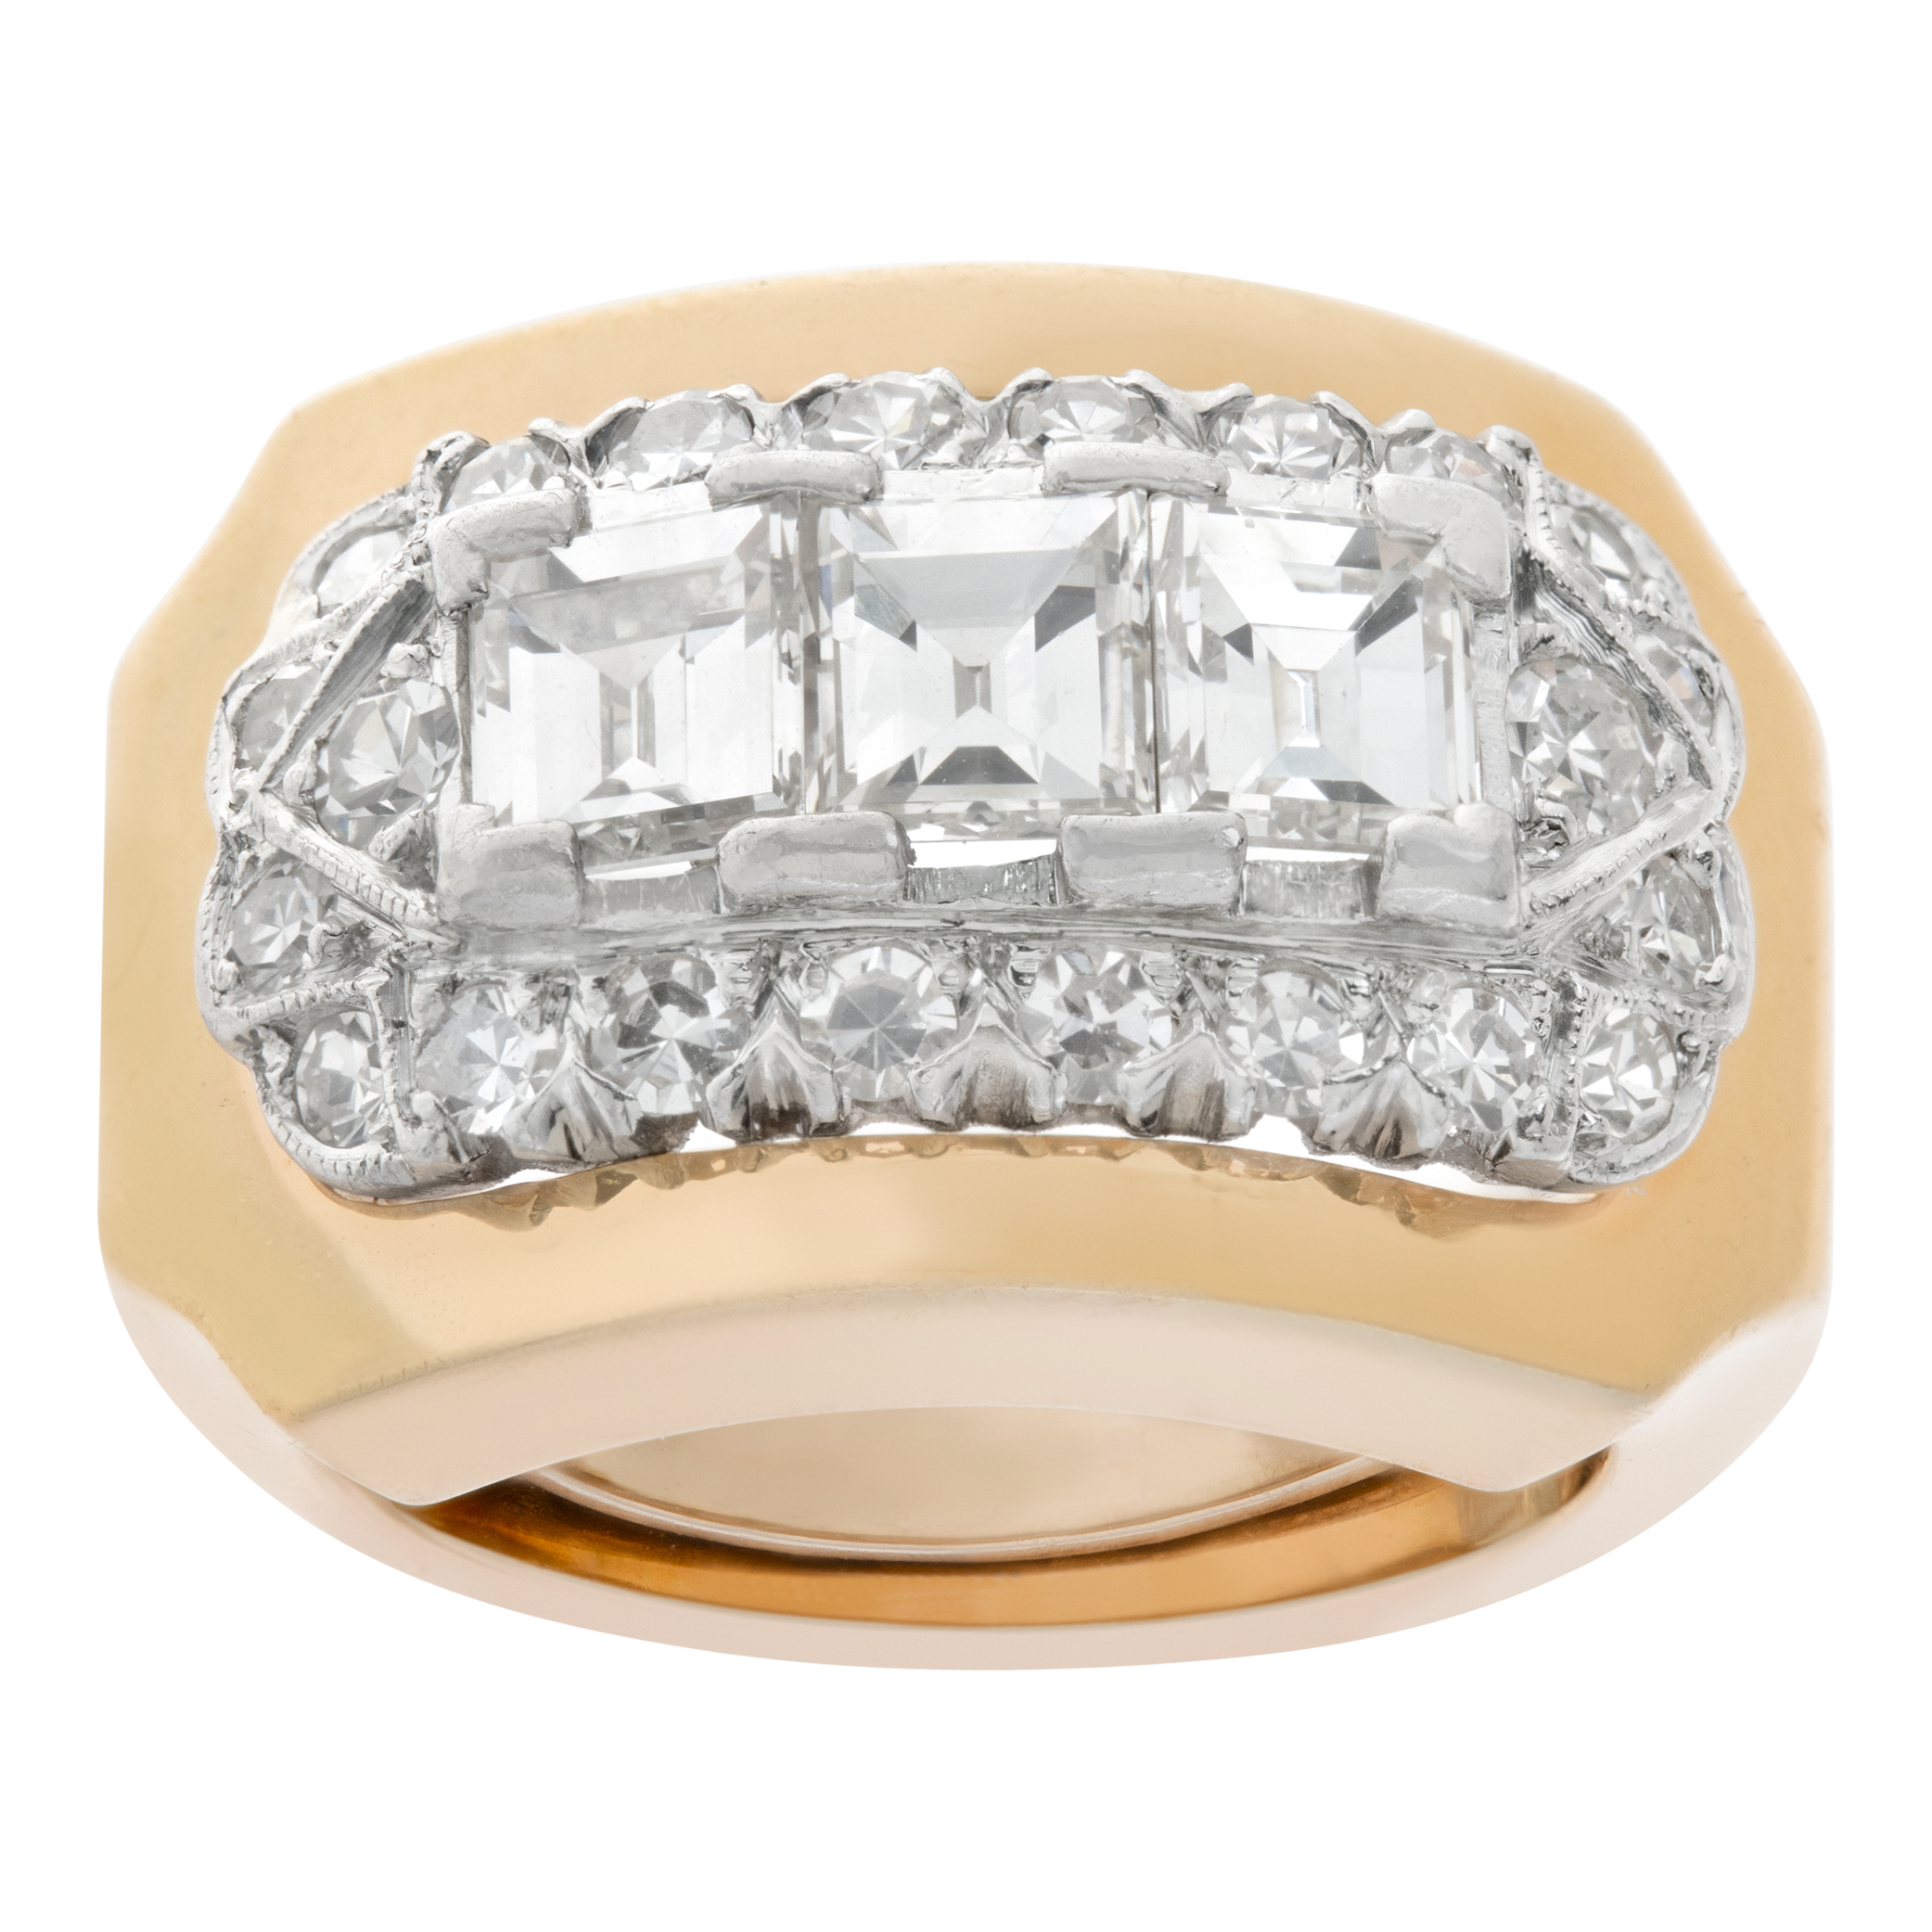 3 Gia Certified, Rectangular Step Cut Diamonds (Total Weight: 1.30 Carat), Set In Platinum & 14k Yellow Gold Ring, Surrounded By 22 Briliant Cut Diamonds (Total Approx. Weight: 1.00 Carat)